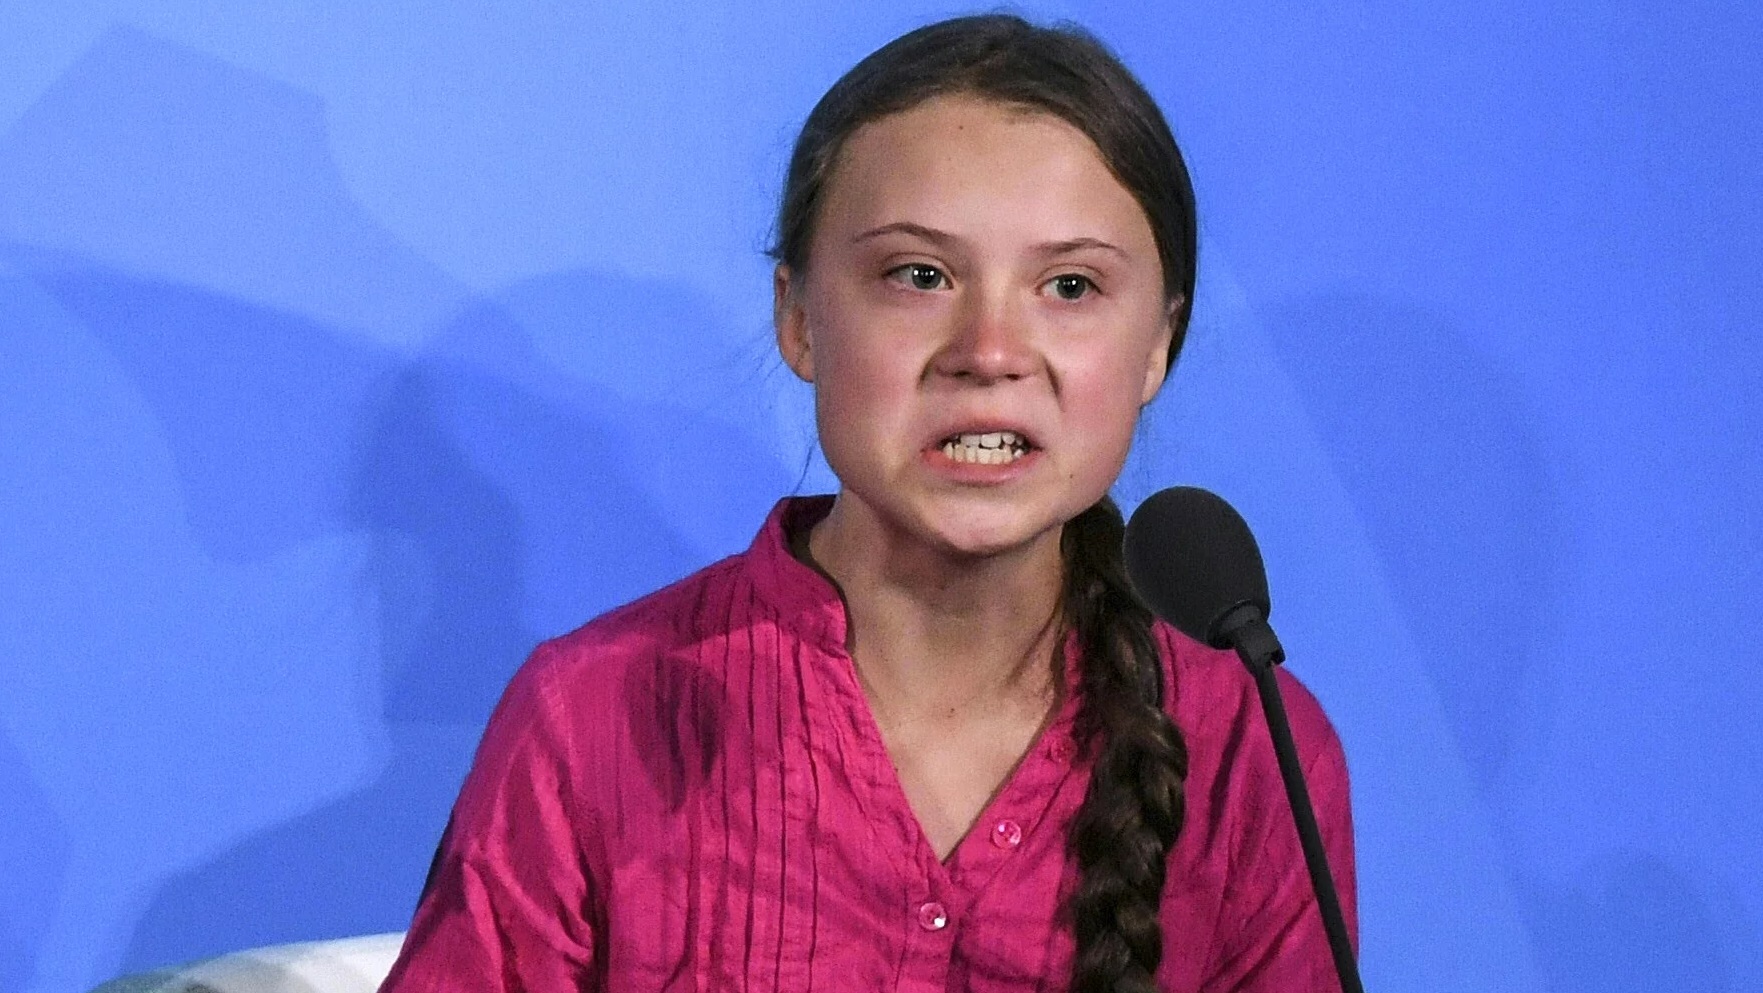 Greta the hysterical climate teen has filed a formal complaint with the U.N. over climate change – who’s scripting all this?